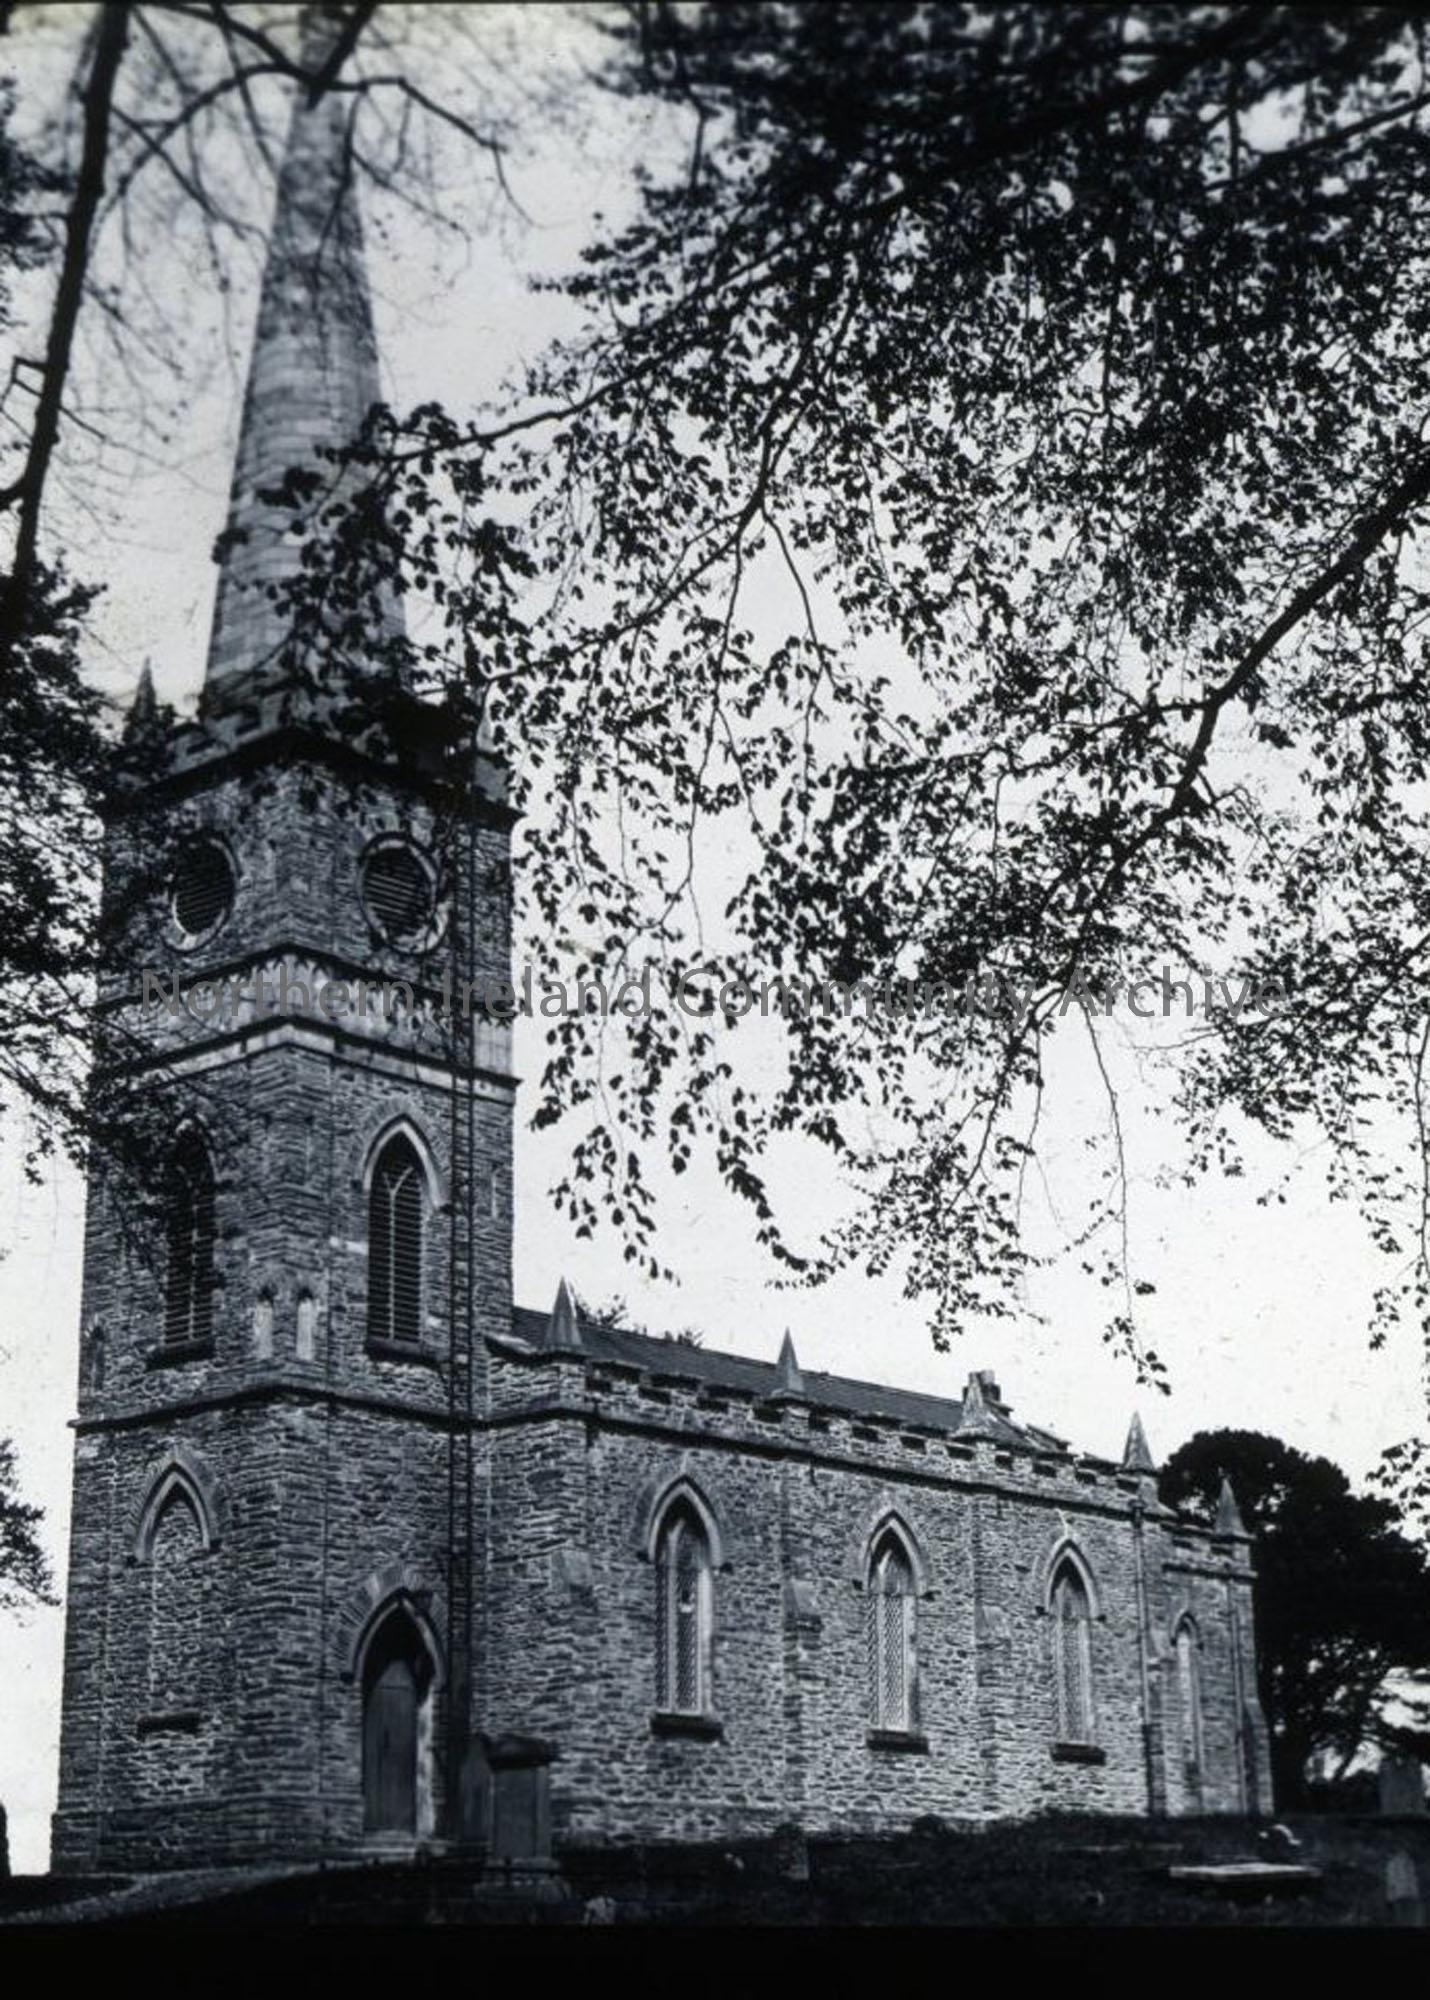 Ballykelly Church (as titled by Sam Henry)